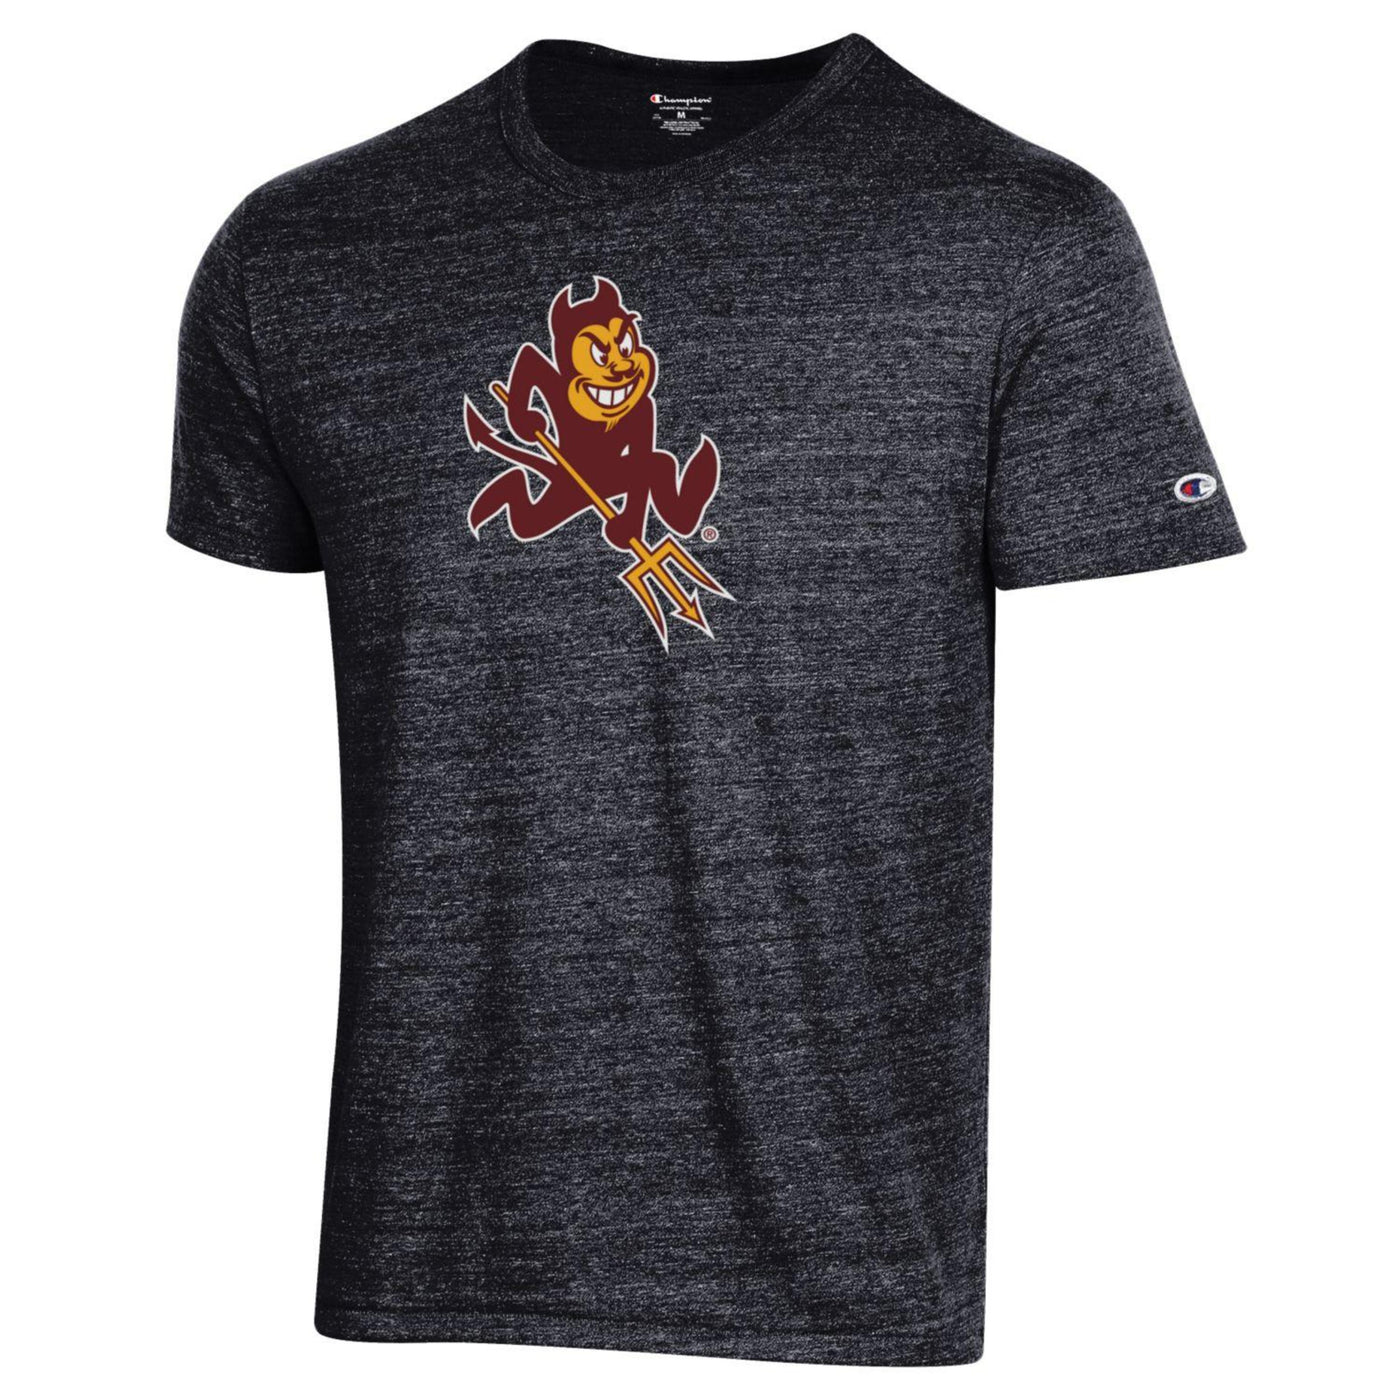 ASU heather grey tee with sparky on the chest outline in white. Sparky logo features his gold pitchfork. Small champion patch on the sleeve. 